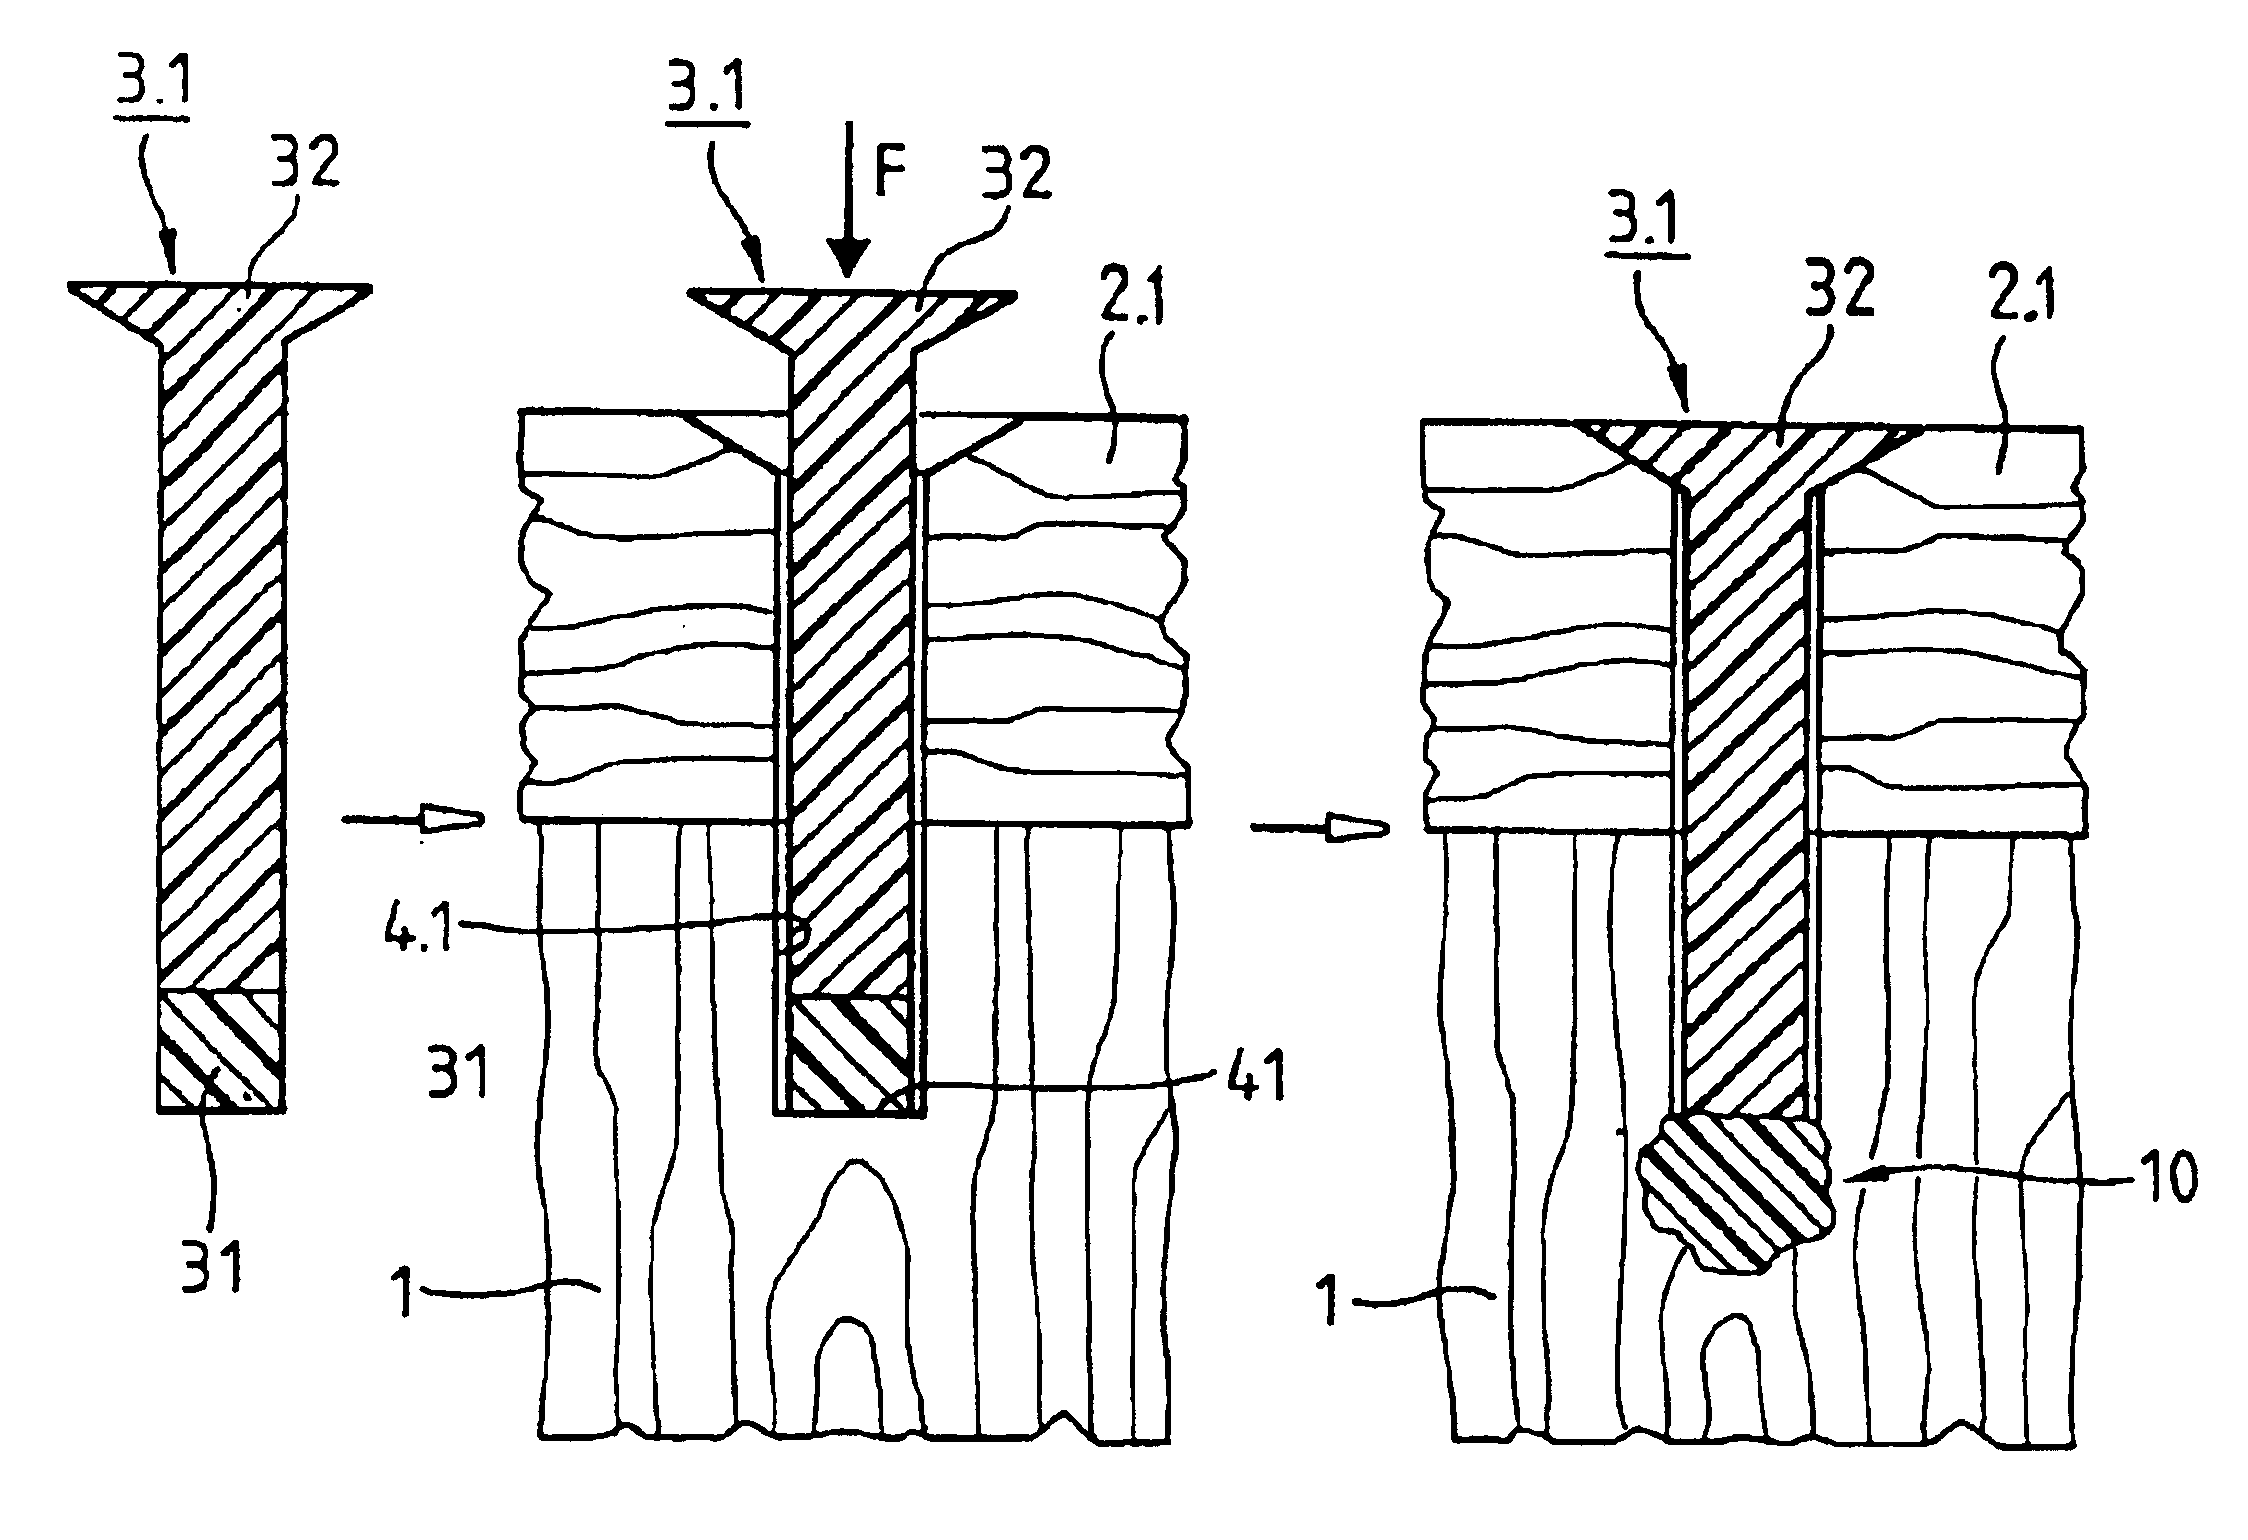 Process for anchoring connecting elements in a material with pores or cavities and connecting elements therefor